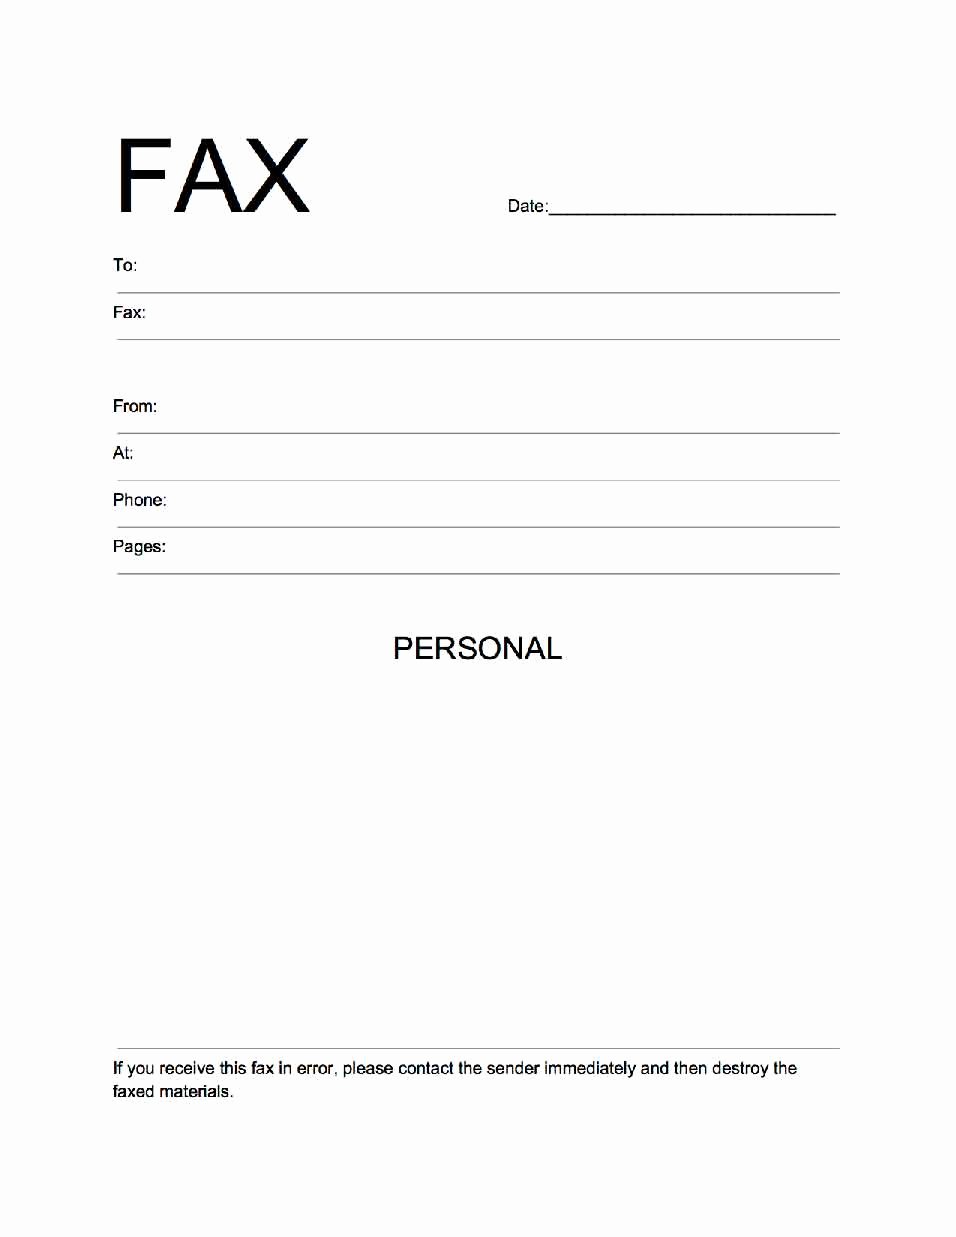 Fax Cover Sheet Template Free Luxury Free Fax Cover Sheet Template Download